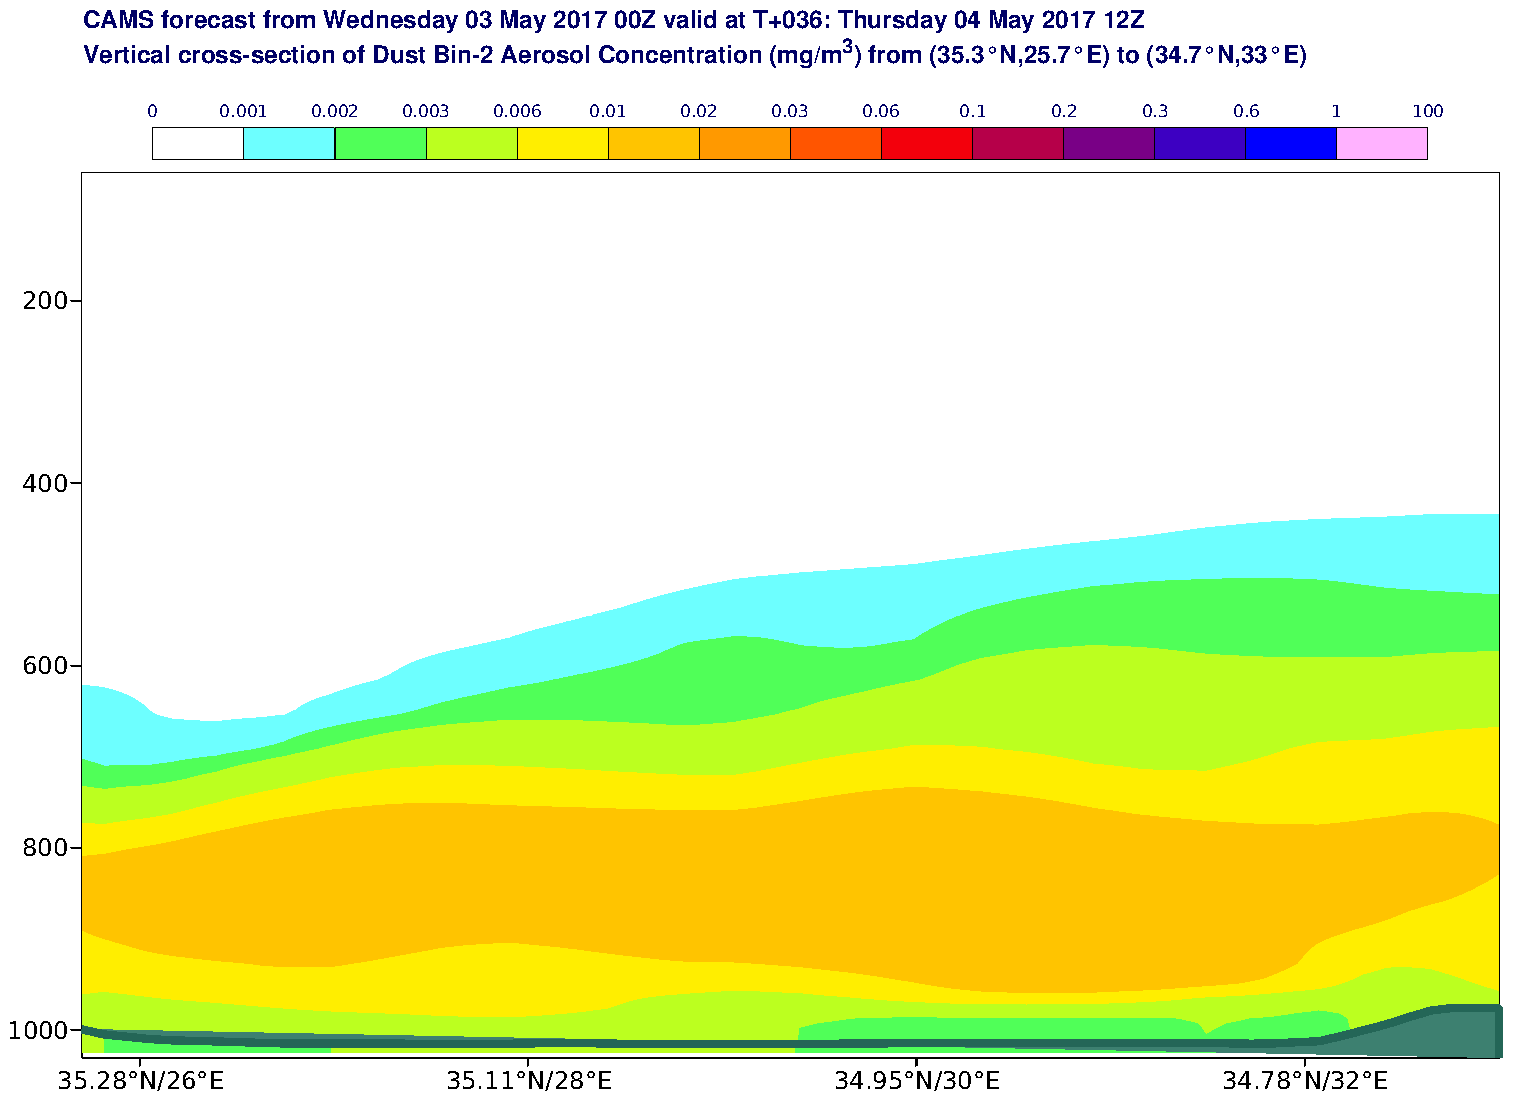 Vertical cross-section of Dust Bin-2 Aerosol Concentration (mg/m3) valid at T36 - 2017-05-04 12:00